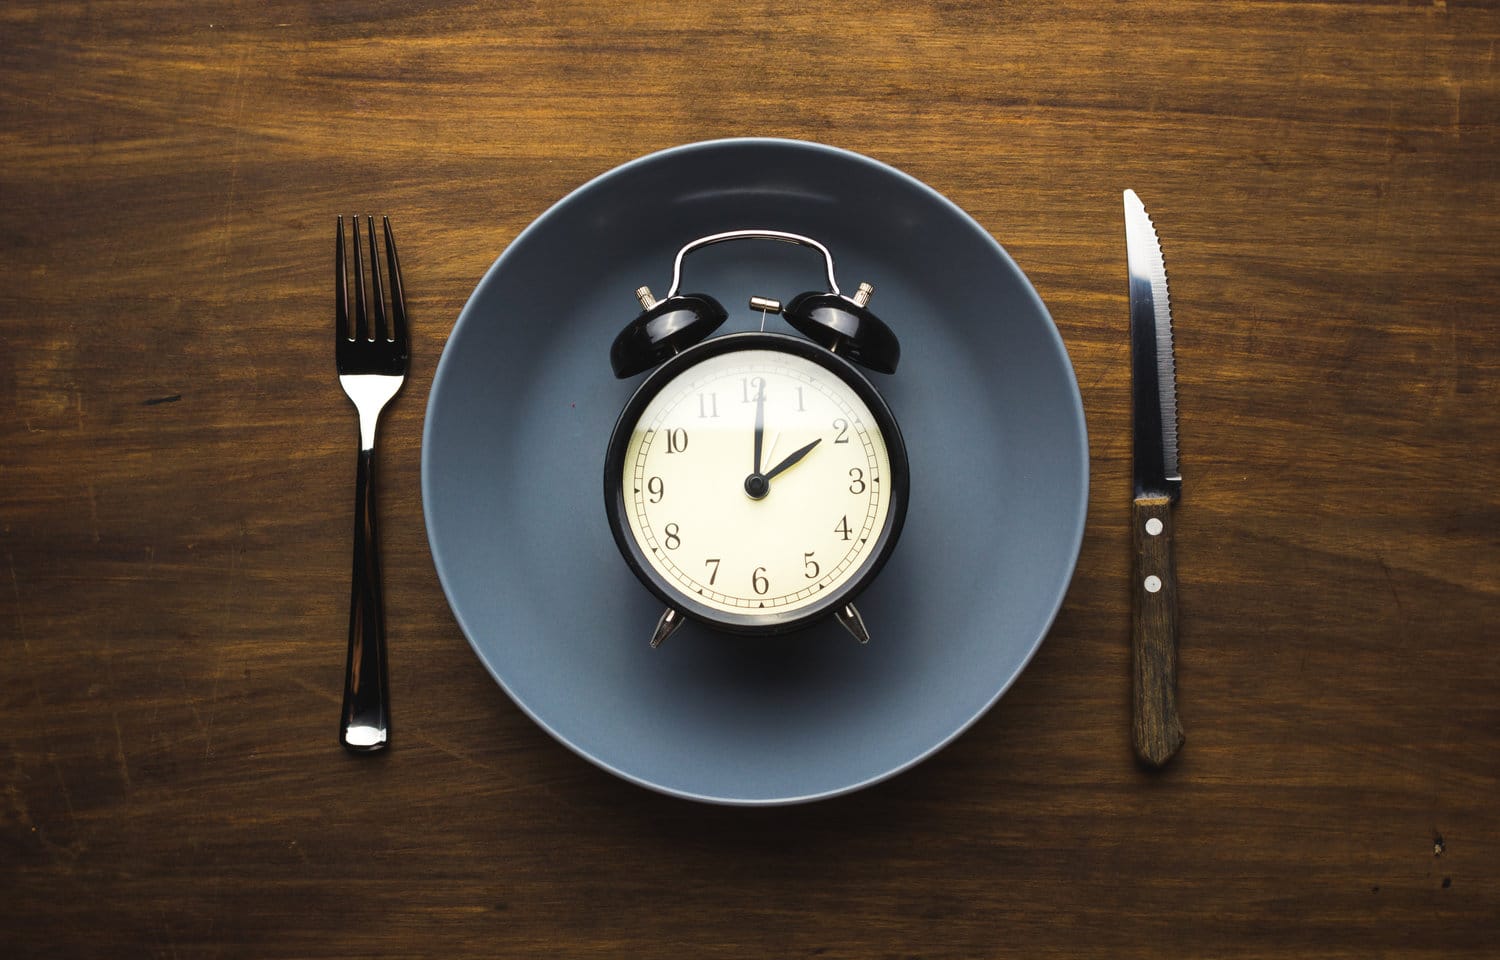 Fasting mimicking diet